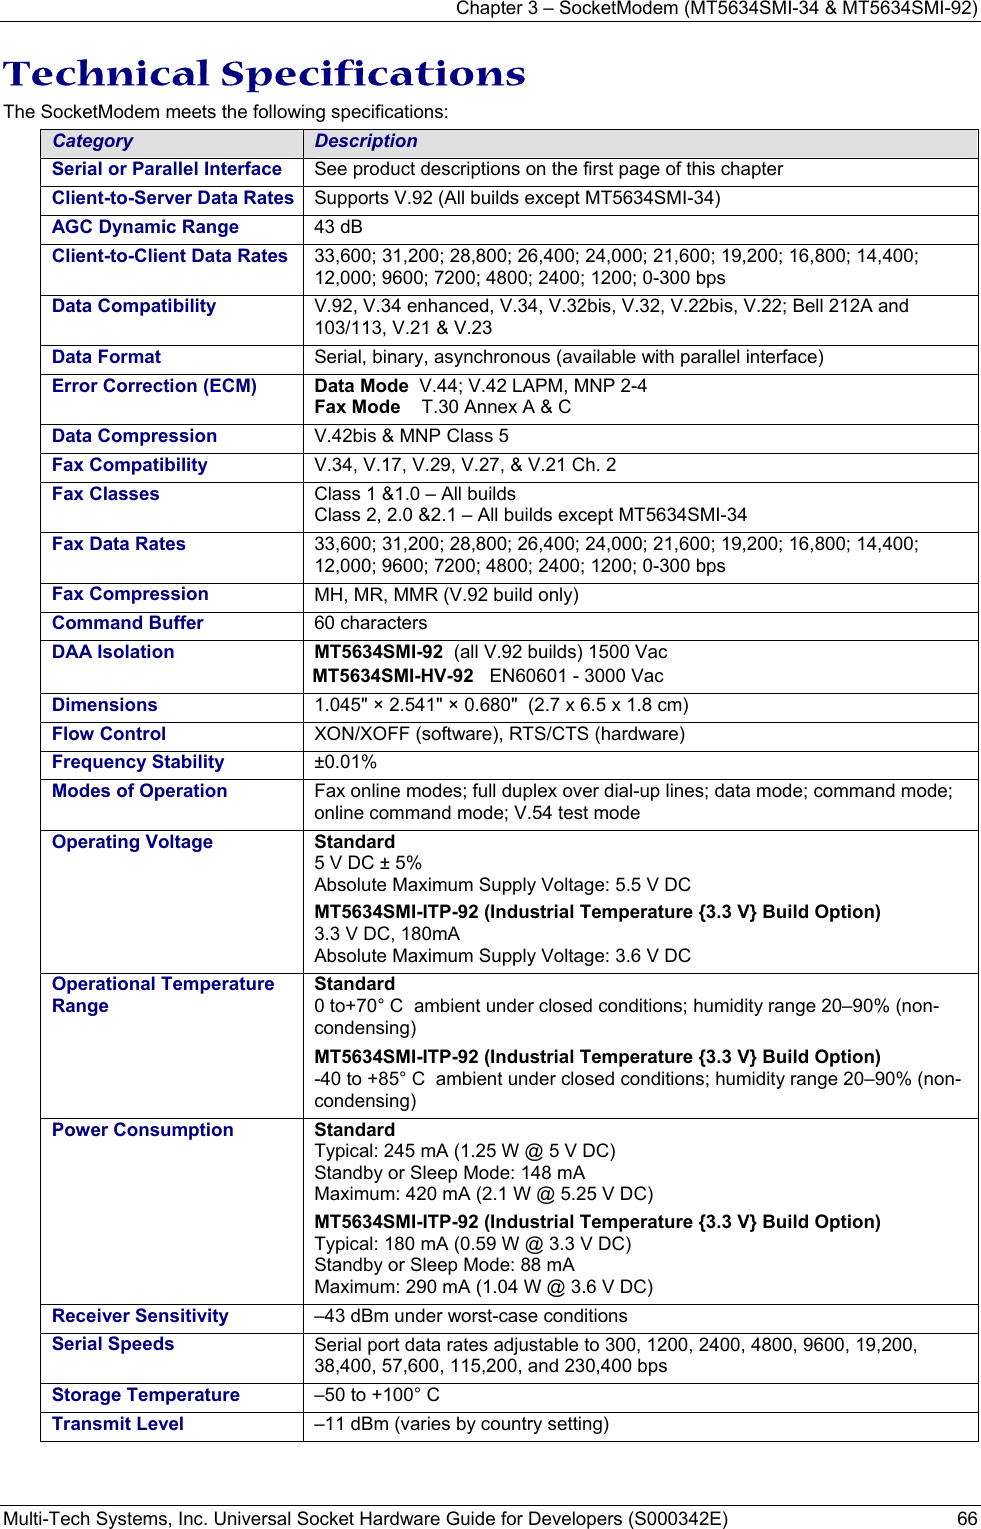 Chapter 3 – SocketModem (MT5634SMI-34 &amp; MT5634SMI-92) Multi-Tech Systems, Inc. Universal Socket Hardware Guide for Developers (S000342E)  66  Technical Specifications  The SocketModem meets the following specifications:  Category  Description Serial or Parallel Interface  See product descriptions on the first page of this chapter Client-to-Server Data Rates  Supports V.92 (All builds except MT5634SMI-34)  AGC Dynamic Range  43 dB Client-to-Client Data Rates  33,600; 31,200; 28,800; 26,400; 24,000; 21,600; 19,200; 16,800; 14,400; 12,000; 9600; 7200; 4800; 2400; 1200; 0-300 bps Data Compatibility  V.92, V.34 enhanced, V.34, V.32bis, V.32, V.22bis, V.22; Bell 212A and 103/113, V.21 &amp; V.23  Data Format  Serial, binary, asynchronous (available with parallel interface) Error Correction (ECM)  Data Mode  V.44; V.42 LAPM, MNP 2-4 Fax Mode    T.30 Annex A &amp; C Data Compression  V.42bis &amp; MNP Class 5 Fax Compatibility  V.34, V.17, V.29, V.27, &amp; V.21 Ch. 2  Fax Classes  Class 1 &amp;1.0 – All builds Class 2, 2.0 &amp;2.1 – All builds except MT5634SMI-34 Fax Data Rates  33,600; 31,200; 28,800; 26,400; 24,000; 21,600; 19,200; 16,800; 14,400; 12,000; 9600; 7200; 4800; 2400; 1200; 0-300 bps Fax Compression  MH, MR, MMR (V.92 build only) Command Buffer  60 characters DAA Isolation   MT5634SMI-92  (all V.92 builds) 1500 Vac MT5634SMI-HV-92   EN60601 - 3000 Vac Dimensions  1.045&quot; × 2.541&quot; × 0.680&quot;  (2.7 x 6.5 x 1.8 cm) Flow Control  XON/XOFF (software), RTS/CTS (hardware) Frequency Stability  ±0.01% Modes of Operation  Fax online modes; full duplex over dial-up lines; data mode; command mode; online command mode; V.54 test mode Operating Voltage  Standard 5 V DC ± 5% Absolute Maximum Supply Voltage: 5.5 V DC MT5634SMI-ITP-92 (Industrial Temperature {3.3 V} Build Option) 3.3 V DC, 180mA Absolute Maximum Supply Voltage: 3.6 V DC  Operational Temperature Range  Standard 0 to+70° C  ambient under closed conditions; humidity range 20–90% (non-condensing) MT5634SMI-ITP-92 (Industrial Temperature {3.3 V} Build Option) -40 to +85° C  ambient under closed conditions; humidity range 20–90% (non-condensing) Power Consumption   Standard  Typical: 245 mA (1.25 W @ 5 V DC) Standby or Sleep Mode: 148 mA Maximum: 420 mA (2.1 W @ 5.25 V DC) MT5634SMI-ITP-92 (Industrial Temperature {3.3 V} Build Option) Typical: 180 mA (0.59 W @ 3.3 V DC) Standby or Sleep Mode: 88 mA Maximum: 290 mA (1.04 W @ 3.6 V DC) Receiver Sensitivity  –43 dBm under worst-case conditions Serial Speeds   Serial port data rates adjustable to 300, 1200, 2400, 4800, 9600, 19,200, 38,400, 57,600, 115,200, and 230,400 bps Storage Temperature  –50 to +100° C    Transmit Level  –11 dBm (varies by country setting)  